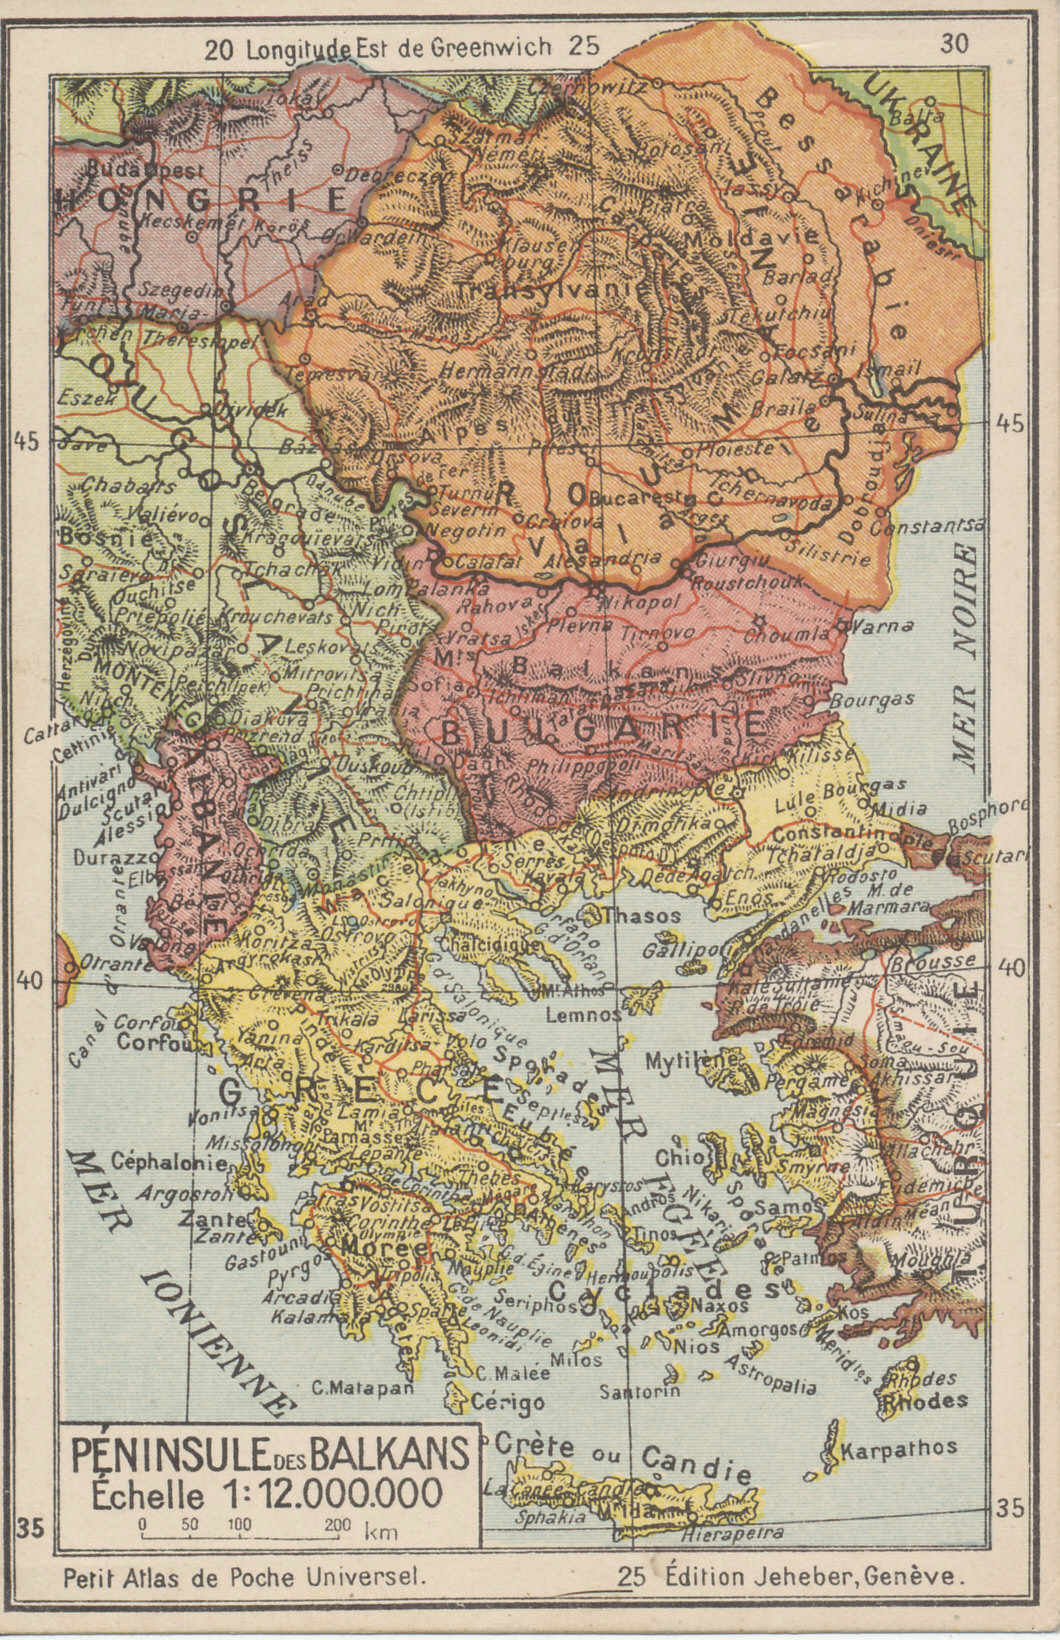 Postwar postcard map of the Balkans including Albania, newly-created Yugoslavia, expanded Romania, and diminished former Central Powers Bulgaria and Turkey. The first acquisitions of Greece in its war against Turkey are seen in Europe where it advanced almost to Constantinople, in the Aegean Islands from Samos to Rhodes, and on the Turkish mainland from its base in Smyrna. The Greco-Turkish war was fought from May 1919 to 1922. The positions shown held from the war's beginning to the summer of 1920 when Greece advanced eastward. Newly independent Hungary and Ukraine appear in the northwest and northeast.
Text:
Péninsule des Balkans
Échelle 1:12.000.000
Petit Atlas de Poche Universel
25 Édition Jeheber Genève
Reverse:
No. 20  Édition Jeheber, Genève (Suisse)
Balkans

Roumanie
(Royaume.)
Superficie . . . 290 000 sq. km.
Population . . . 16 000 000 hab. (50 par sq. km.
Capitale: Bucarest . . . 338 000 hab.

Bulgarie
(Royaume.)
Superficie . . . 100 000 sq. km.
Population . . . 4 000 000 hab. (40 par sq. km.)
Capitale: Sofia . . . 103 000 hab.

Grèce
(Royaume. Capitale: Athènes.)
En Europe (y compris la Crète et les iles) 200 000 sq. km. 6 000 000 hab. 30 p. sq. km.
En Asie mineure . . . 30 000 sq. km 1 300 000 hab. 43 p. sq. km.
Total 230 000 sq. km. 7 300 000 hab. 32 p. sq. km.
Ville de plus de 50 000 habitants:
Smyrne (Asie) . . . 350 000 hab.
Athènes . . . 175 000 hab.
Salonique . . . 150 000
Andrinople . . . 70 000 hab.
Pirée . . . 70 000 hab.

Turquie d'Europe
(Empire Ottoman.)
Superficie . . . 2 000 sq. km.
Population . . . 1 100 000 550 par sq. km.
Capitale: Constantinople 1 000 000 hab.

Albanie
Superficie . . . 30 000 sq. km.
Population . . . 800 000 hab. (27 par sq. km.)
Villes: Scutari . . . 30 000 hab.
Durazzo . . . 5 000 hab.

Yougoslavie
Voir le tableau des statisques de ce pays, ainsi que la carte de la partie occidentale de la Yougoslavie, sur la carte d'Italie.

Inst. Géog. Kummerl